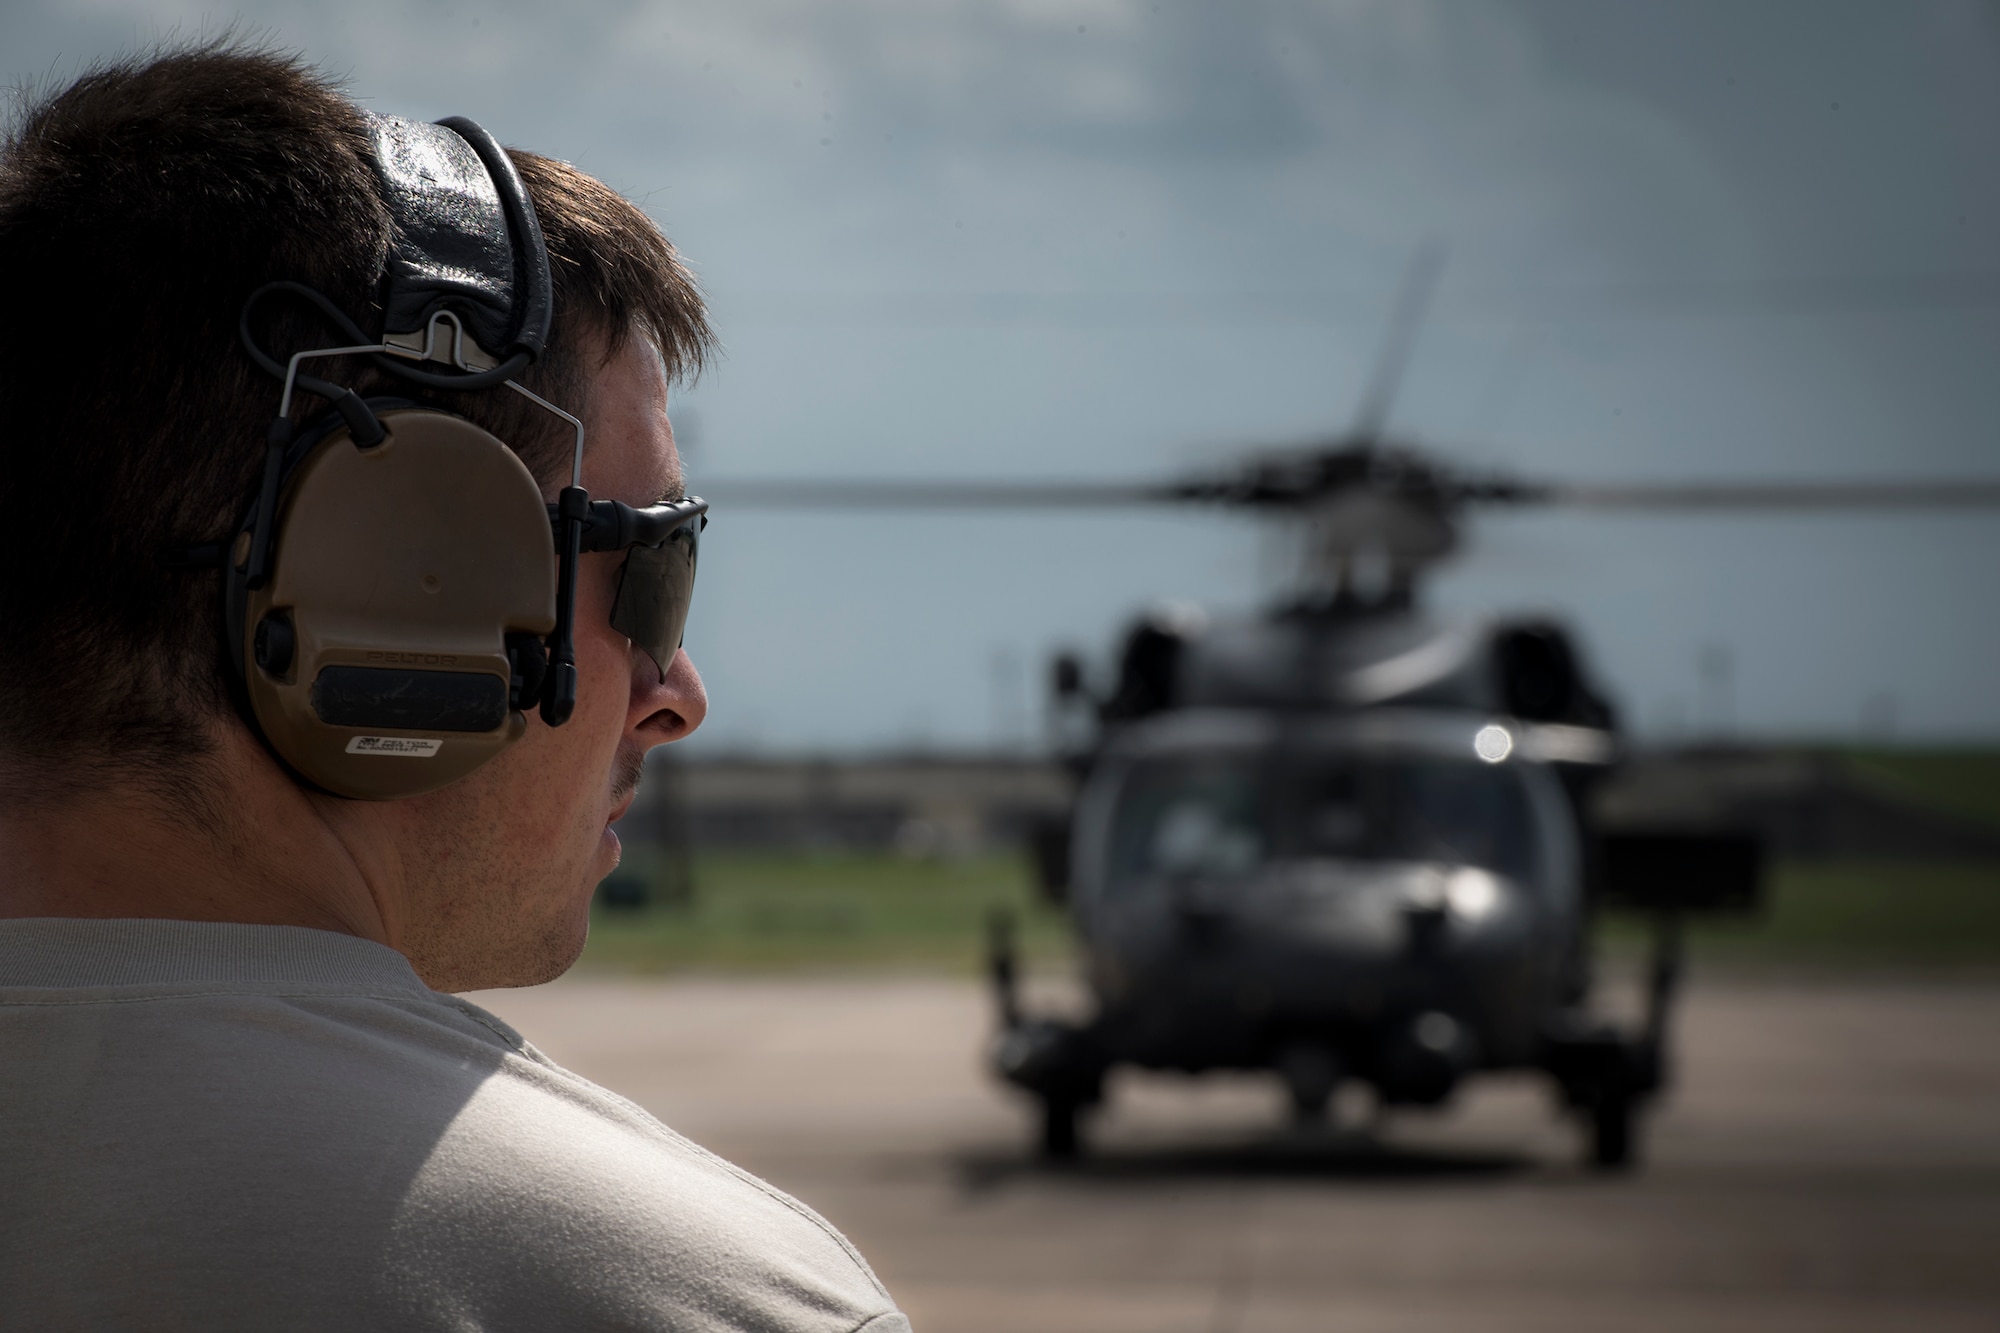 A maintainer from the 41st Helicopter Maintenance Unit marshals an HH-60G Pave Hawk prior to a sortie in support of Hurricane Harvey relief efforts, Aug. 28, 2017, at Naval Air Station Fort Worth Joint Reserve Base, Texas. The 347th Rescue Group from Moody Air Force Base, Ga. sent aircraft and personnel in support of Air Forces Northern as part of Northern Command's support of FEMA's disaster response efforts. (U.S. Air Force photo by Staff Sgt. Ryan Callaghan)